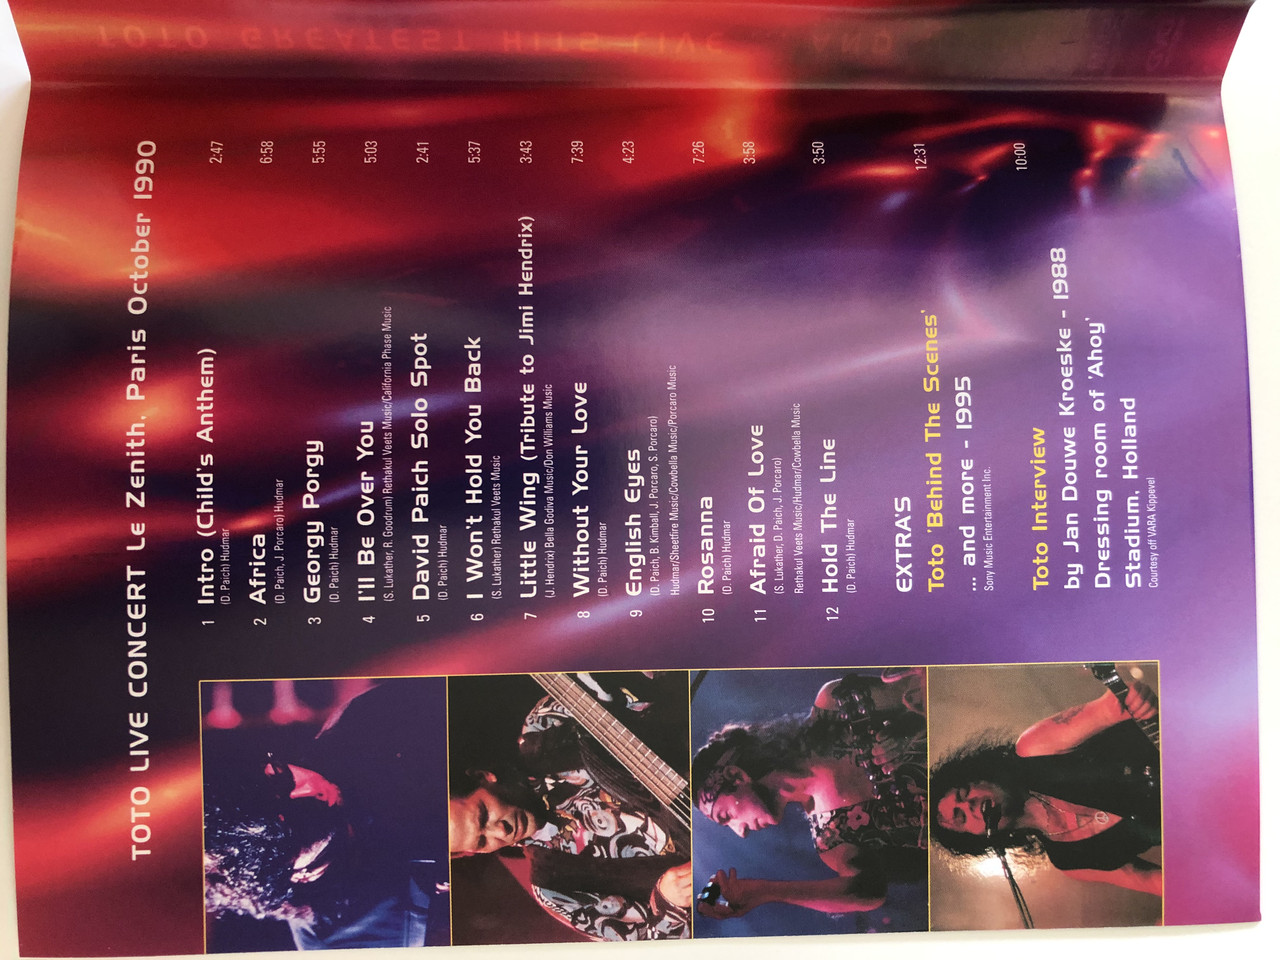 Greatest Hits Live DVD 2002 Toto and more / Toto Live Concert - Le Zenith,  Paris, October 1990 / Extras: Interviews, Behind the Scenes / Sony Music  Media - Bible in My Language